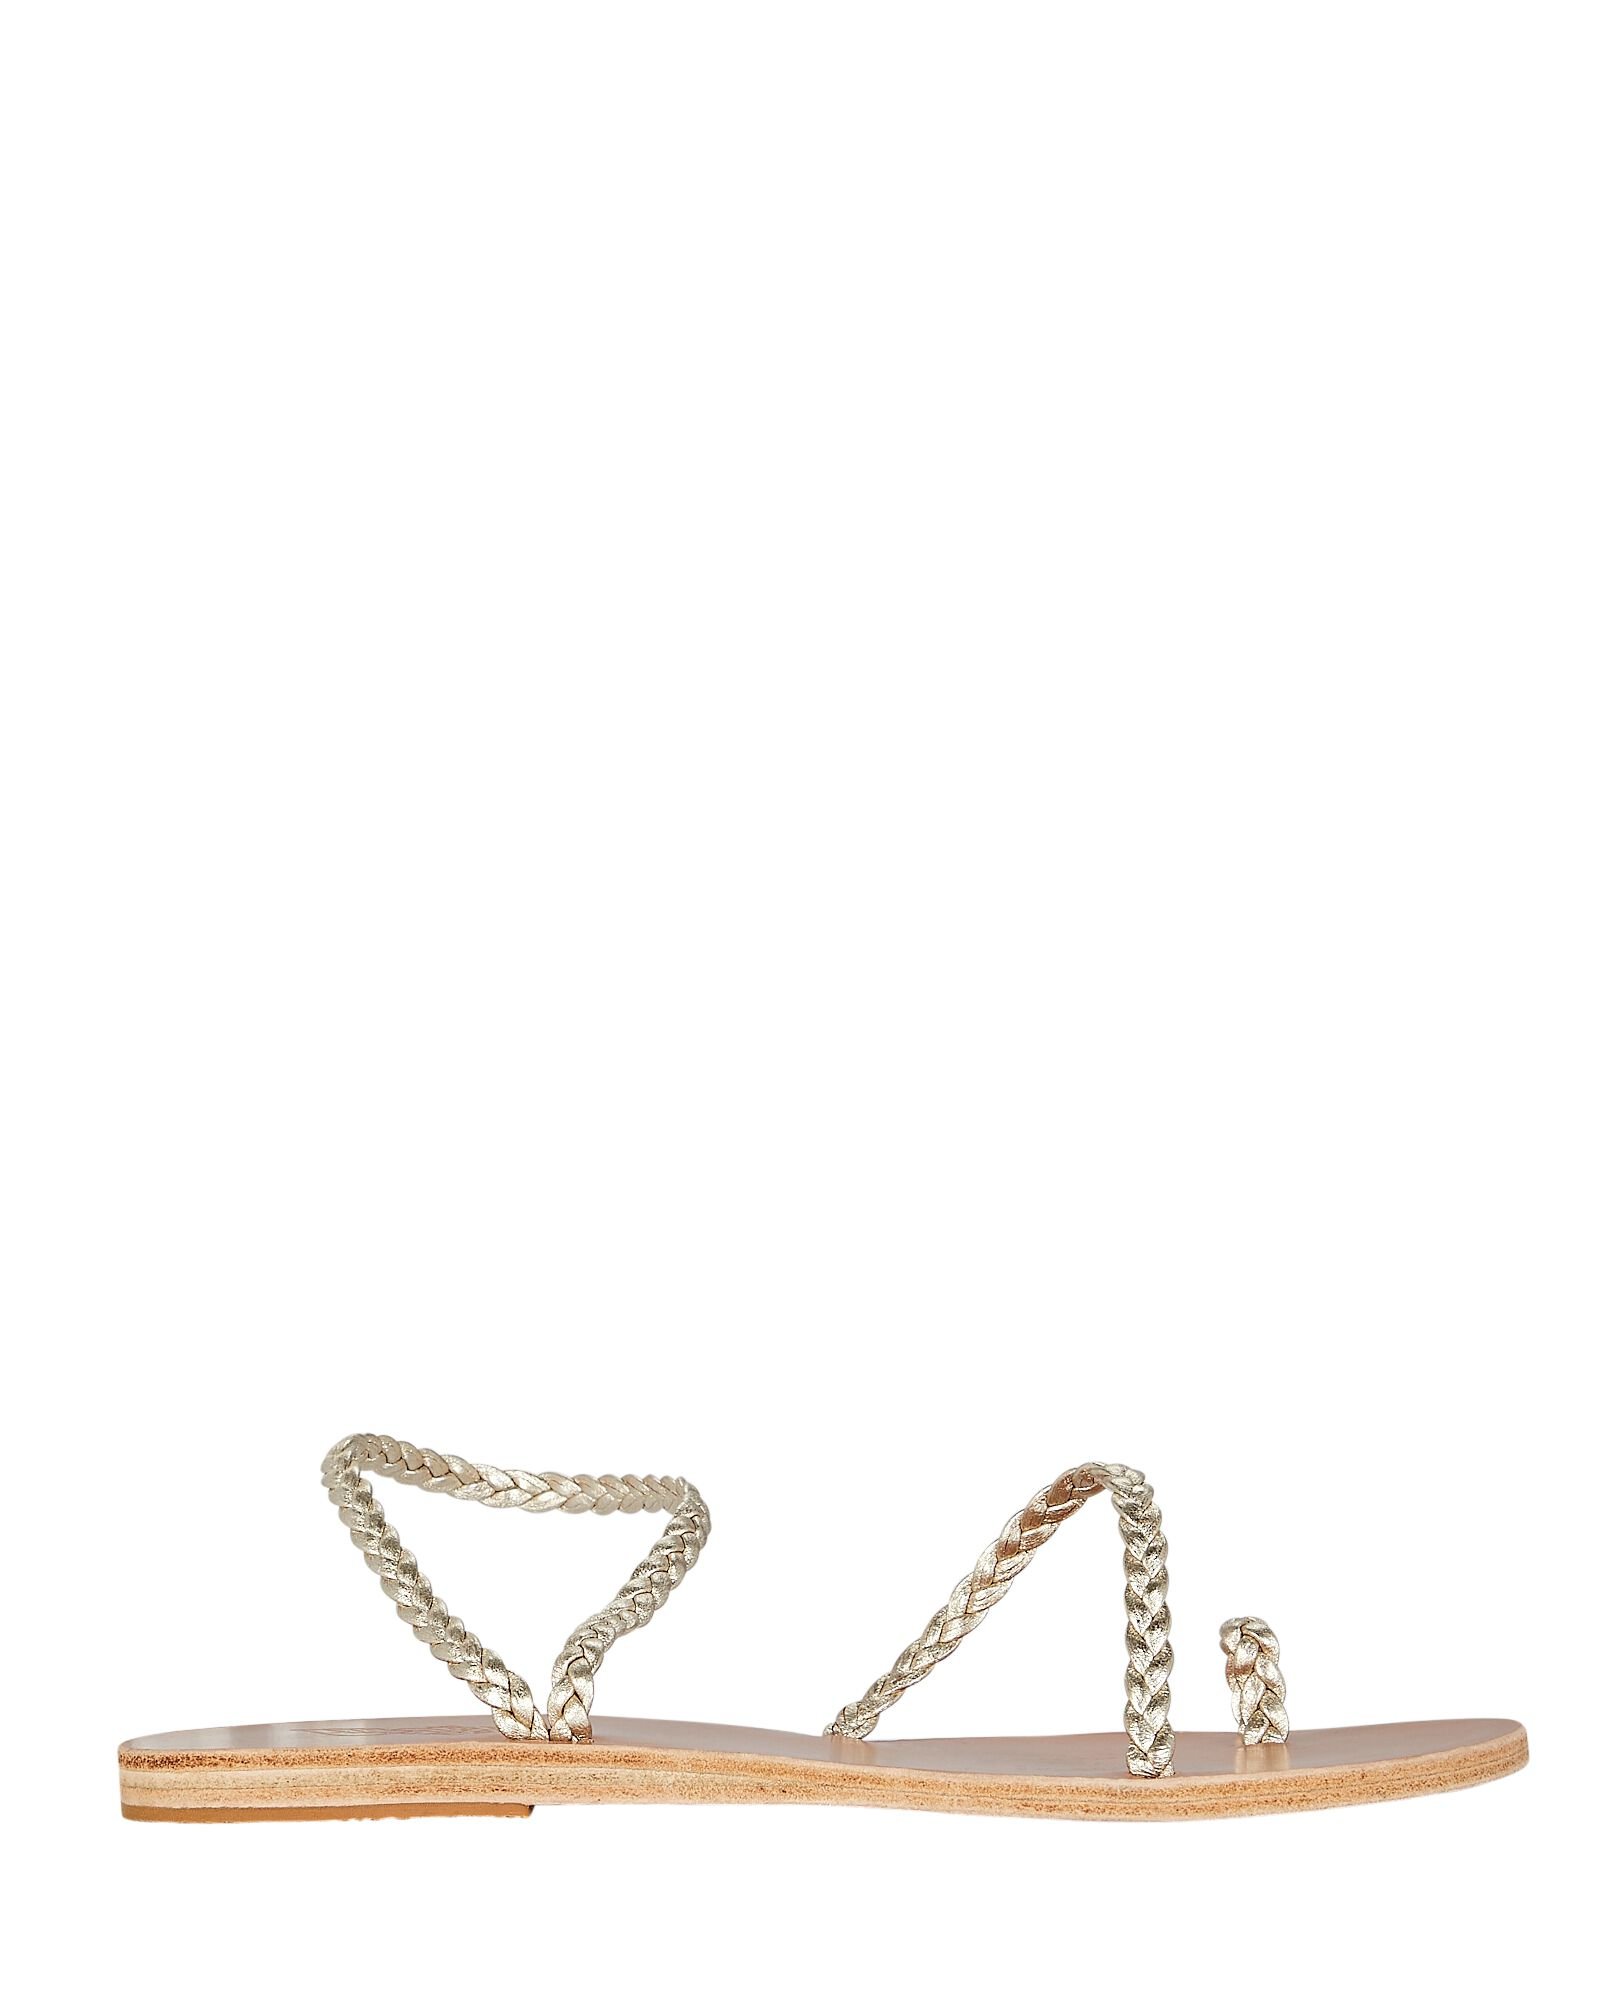 Ancient Greek Sandals Eleftheria Braided Sandals in Gold Leather.jpeg